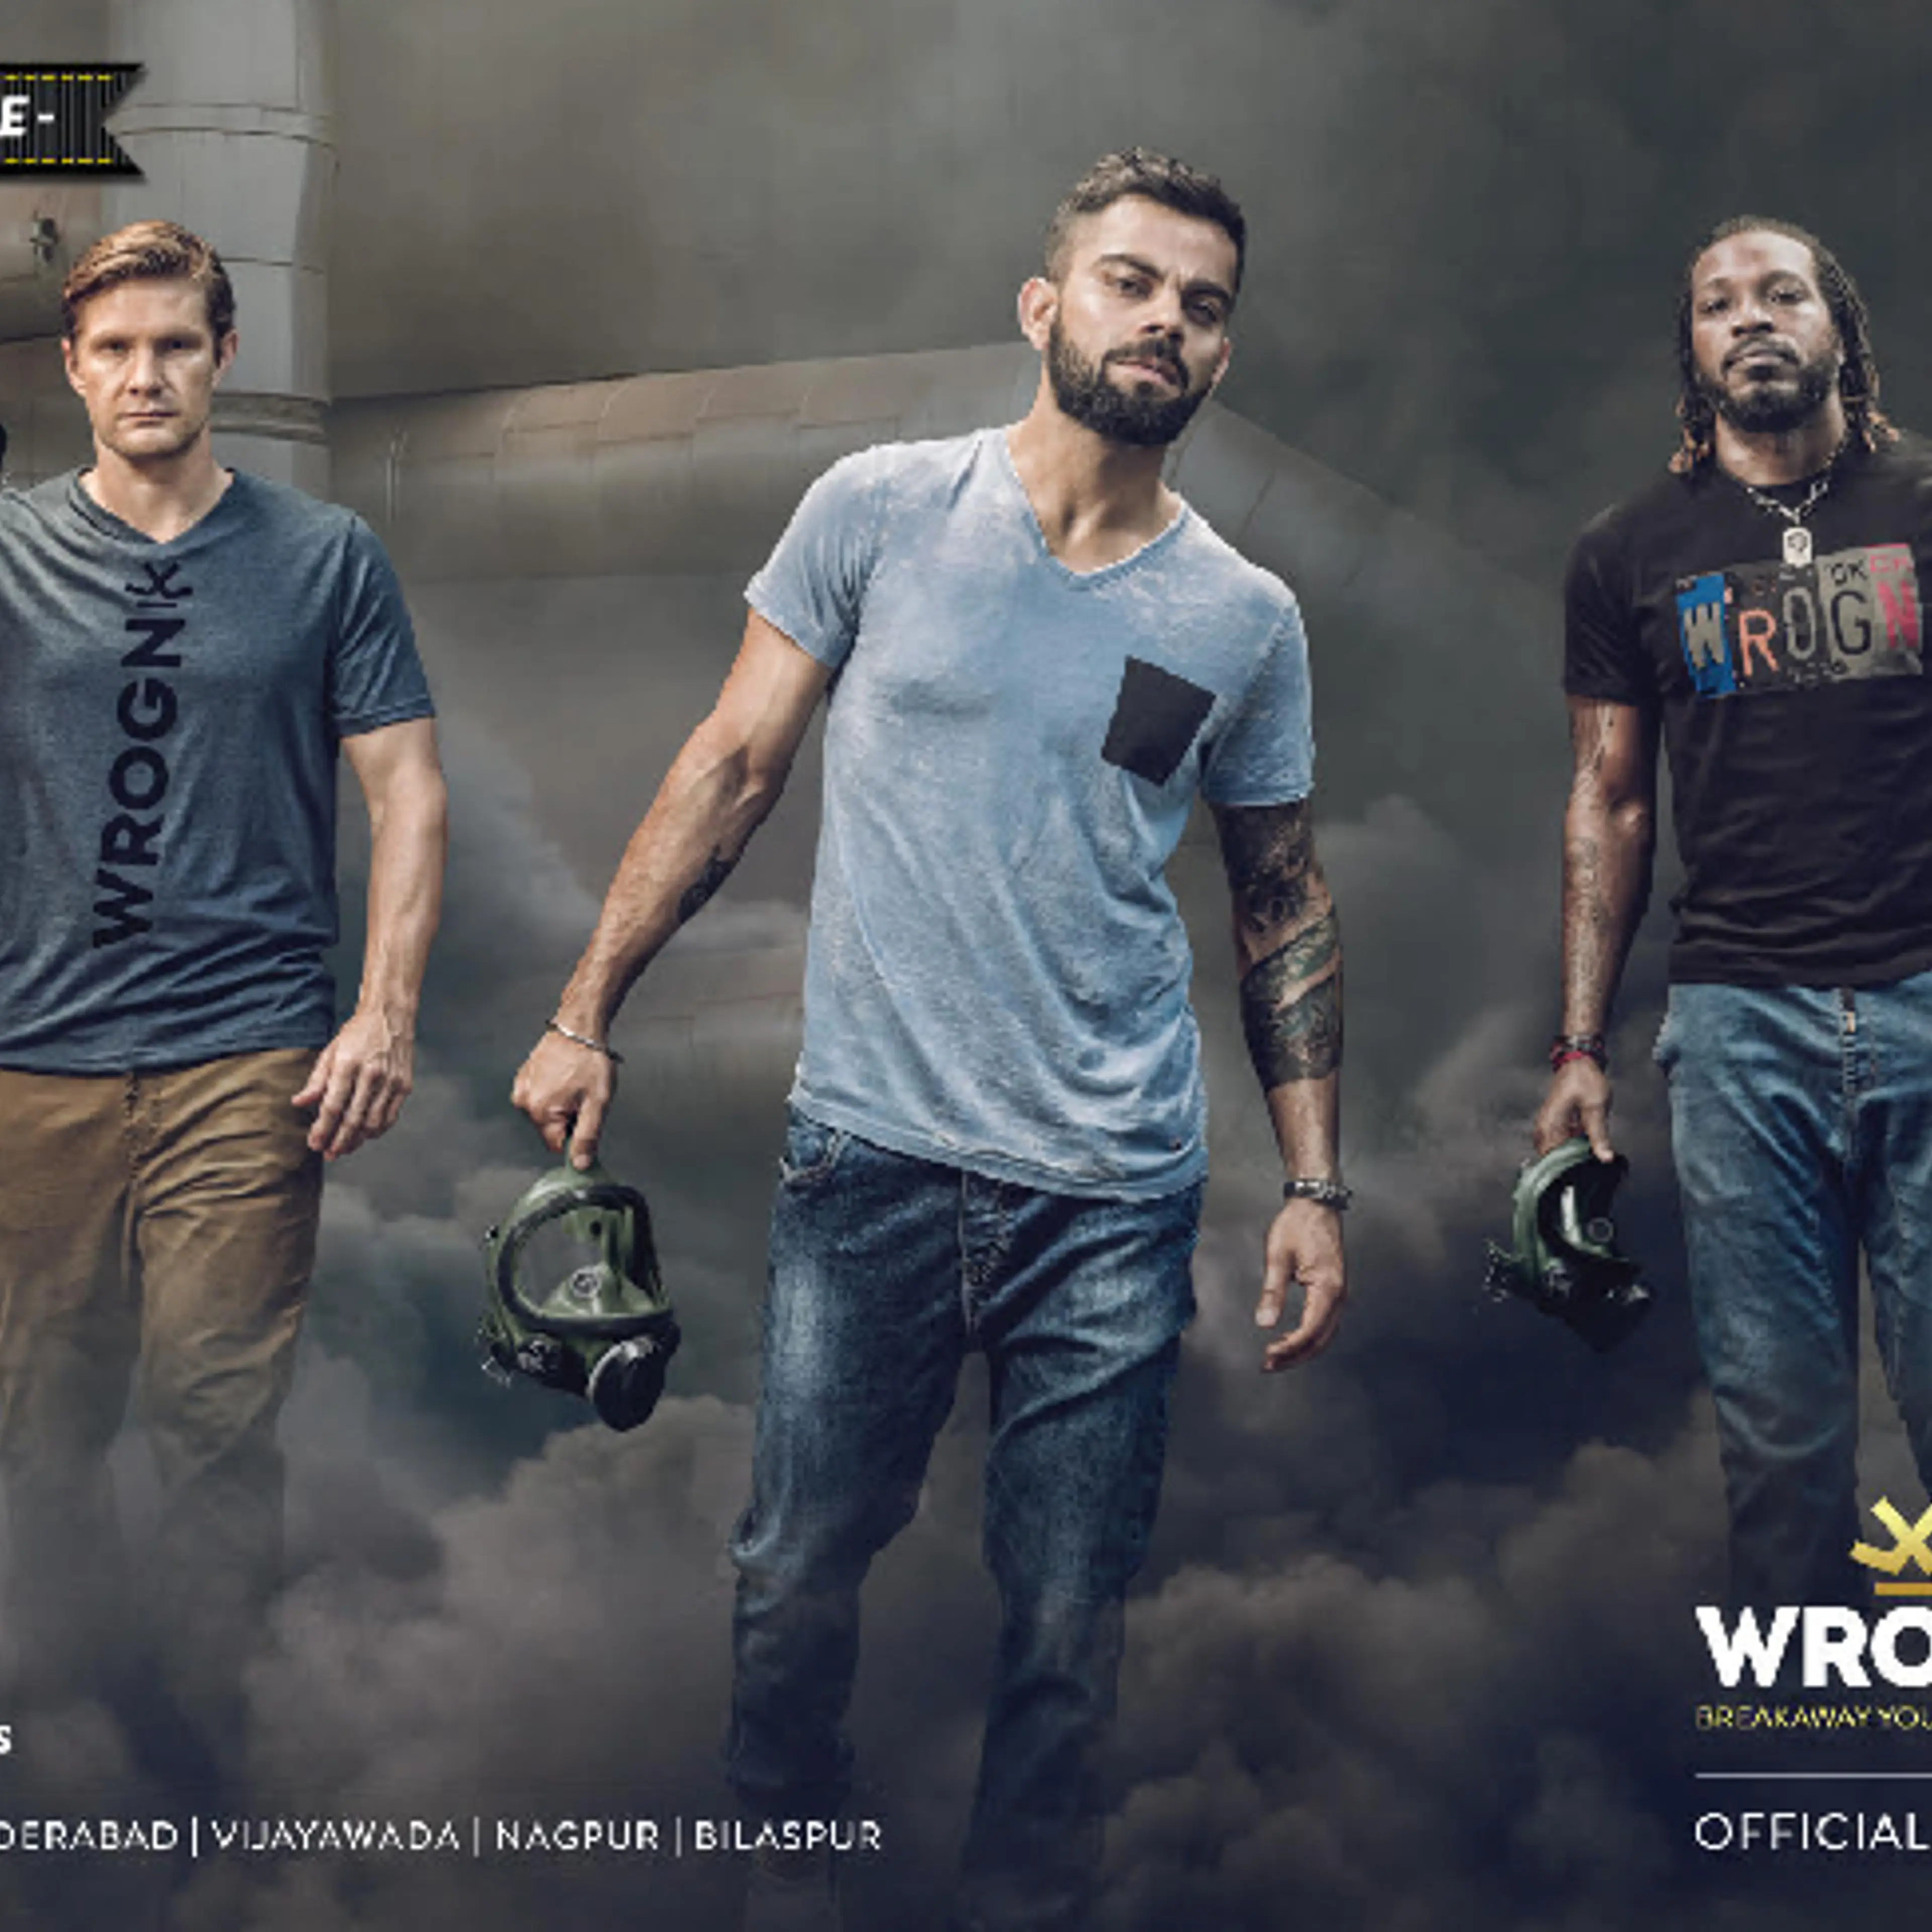 TMRW invests Rs 125 Cr in fashion brand WROGN backed by Virat Kohli, Accel